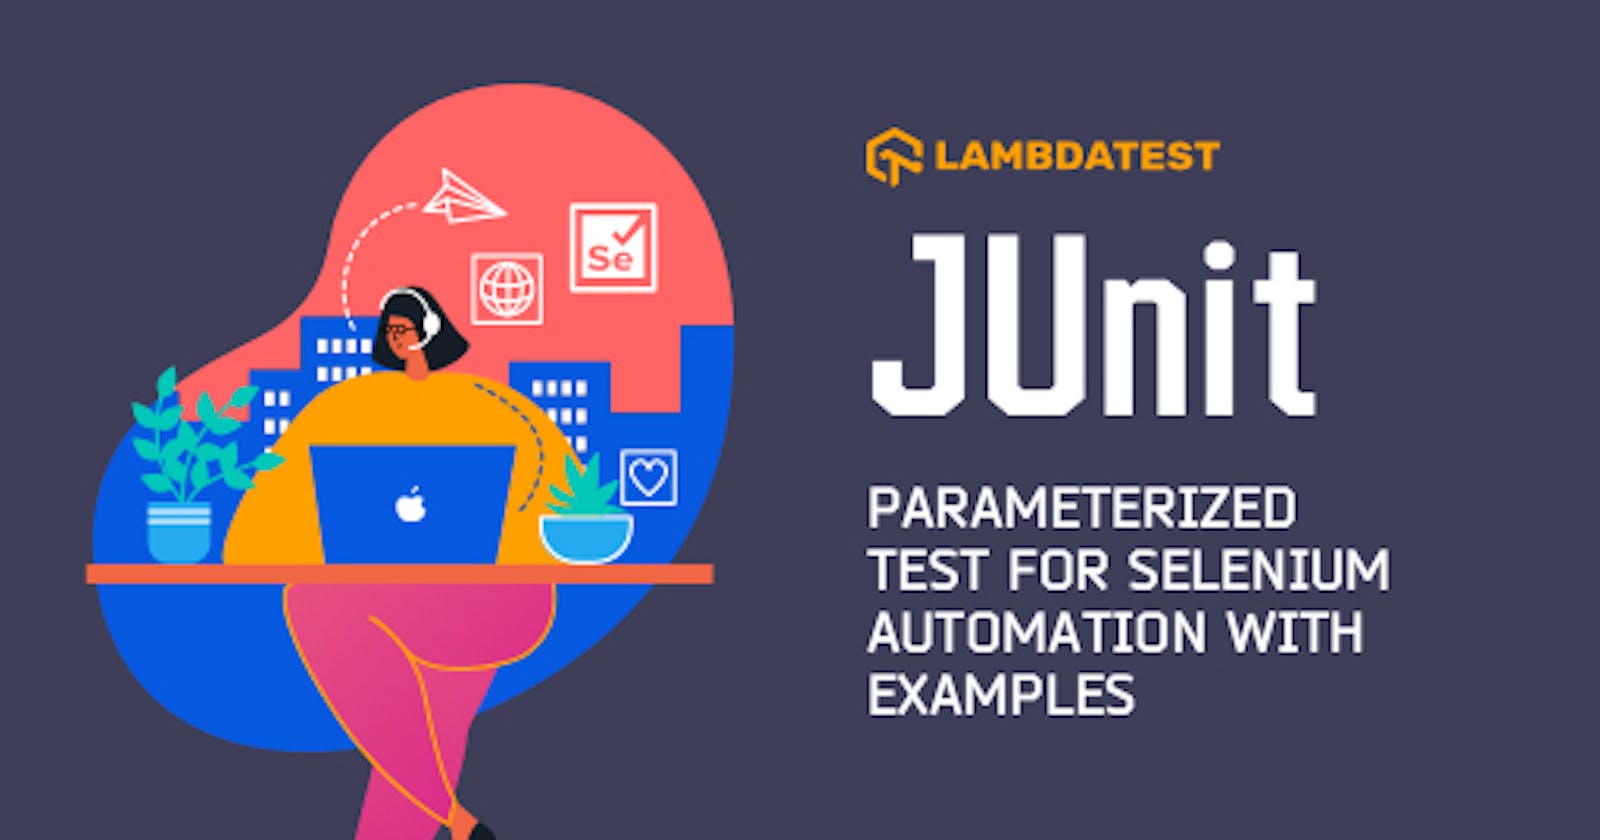 JUnit Parameterized Test For Selenium Automation With Examples